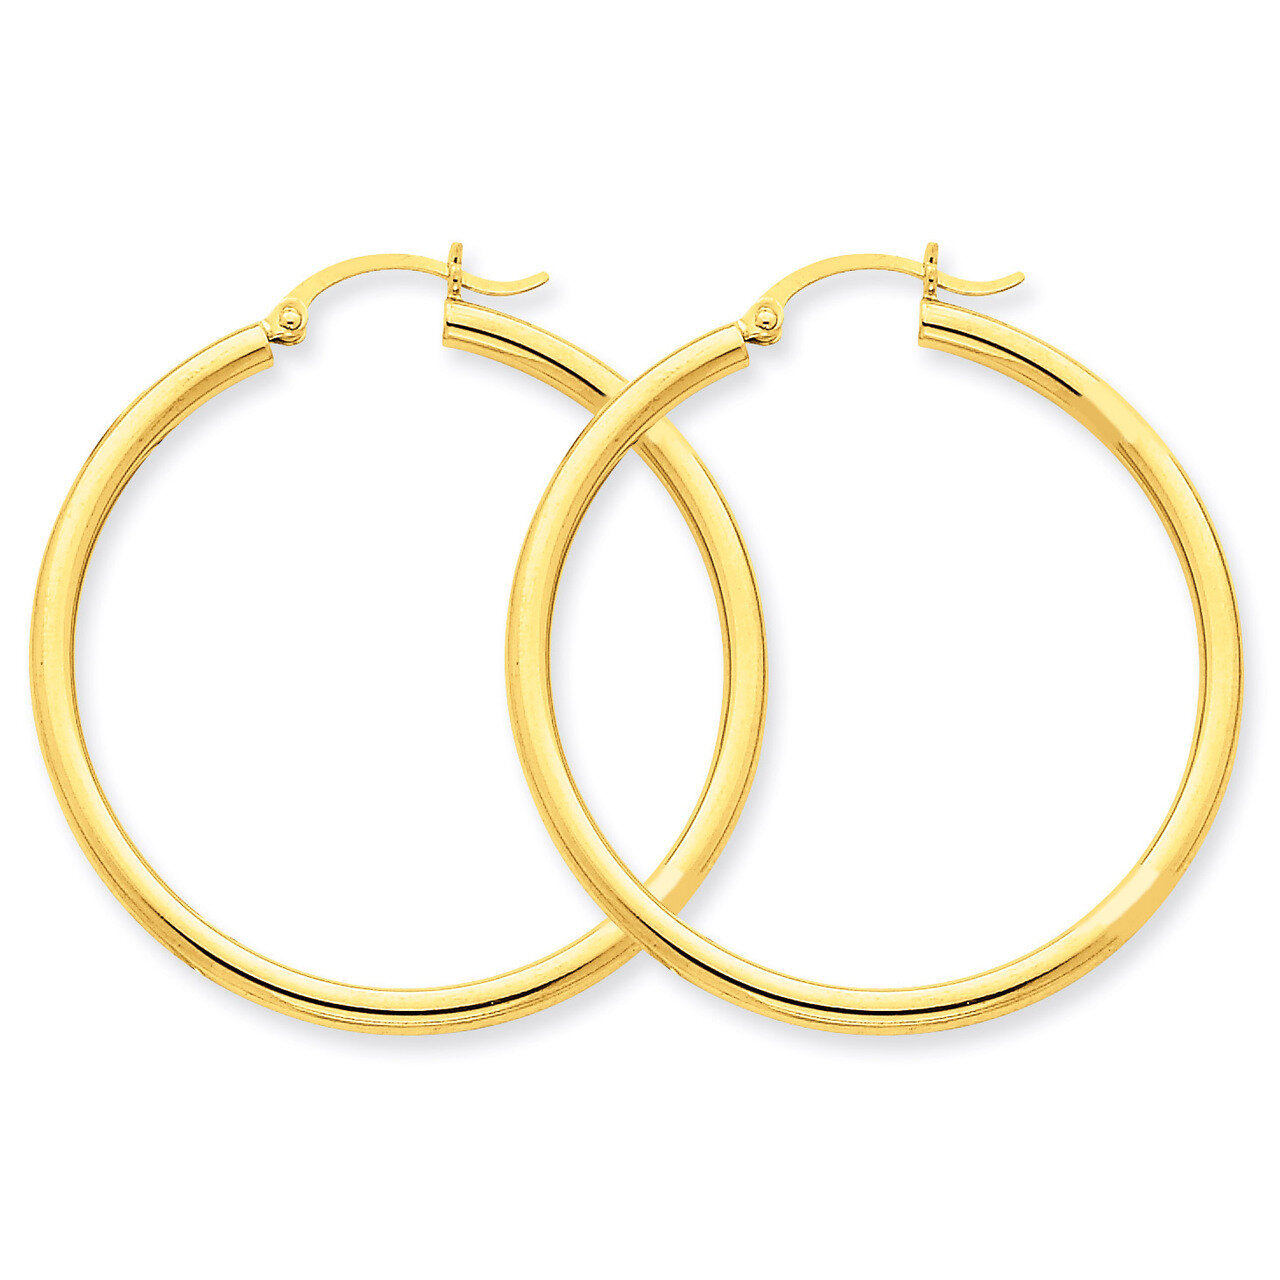 2.5mm Round Hoop Earrings 14k Gold Polished T925